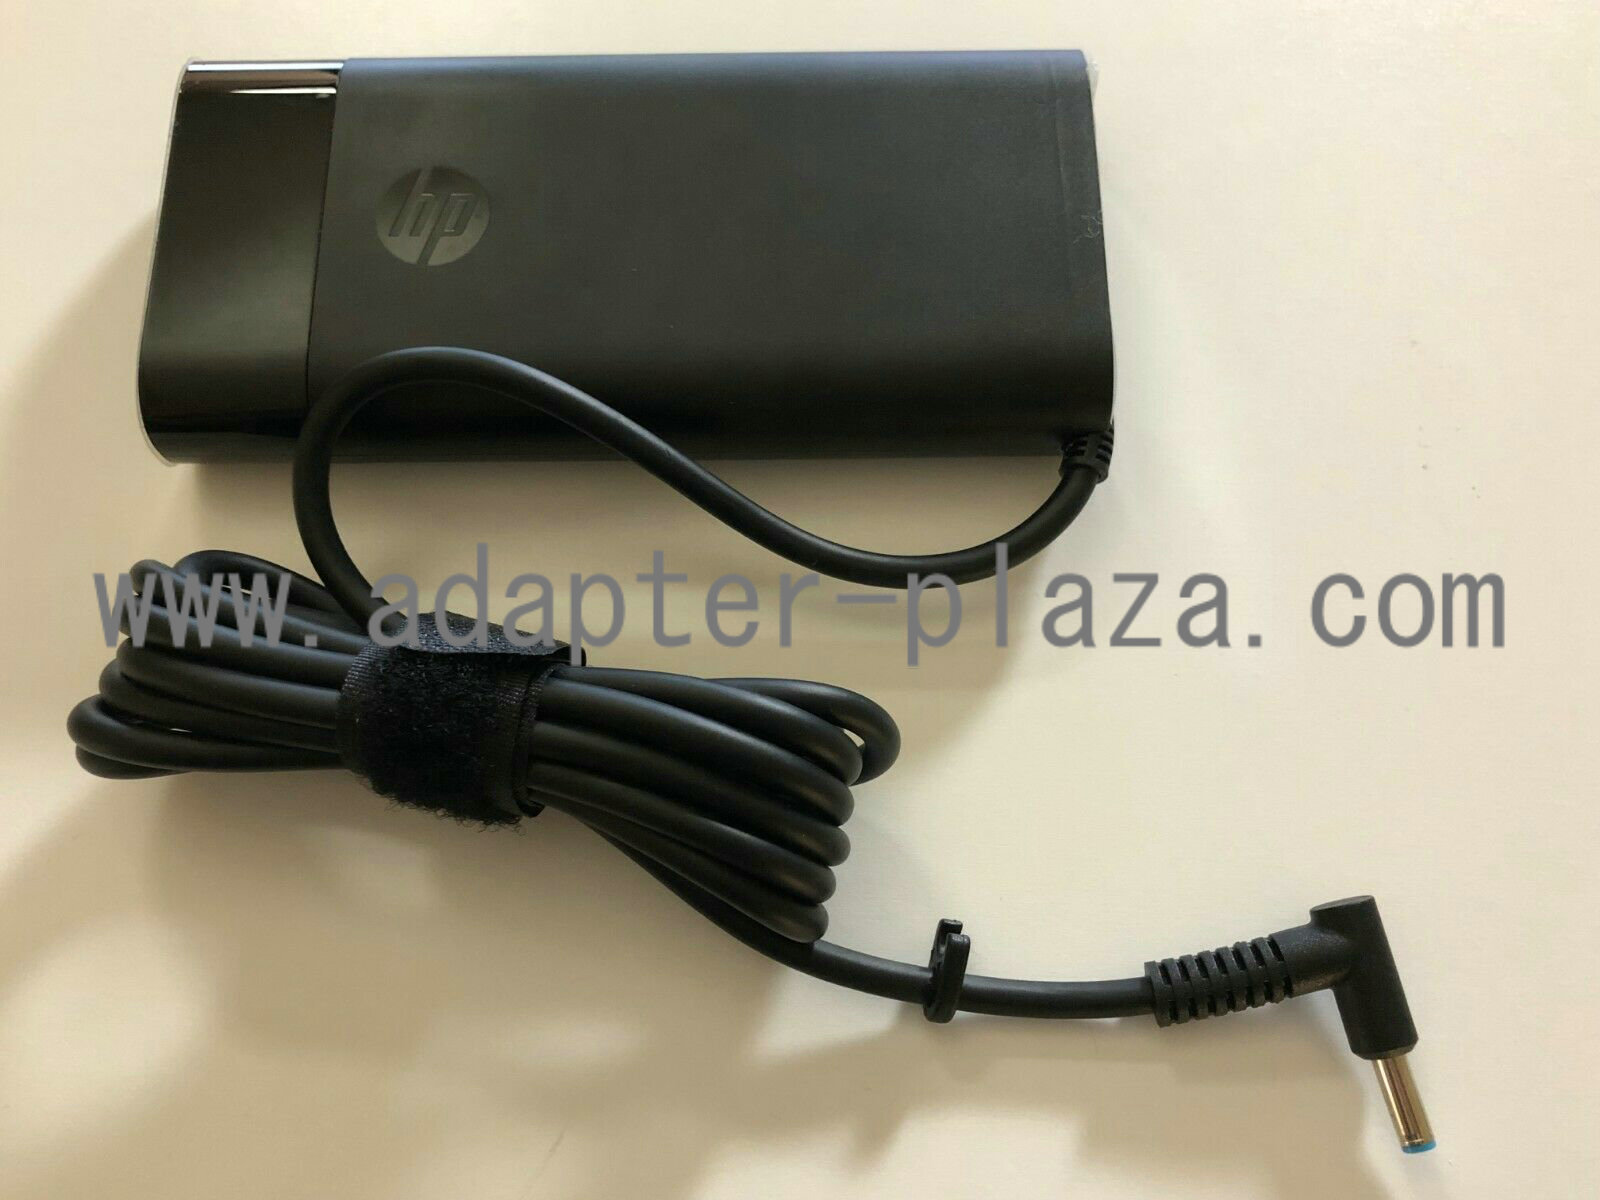 New 19.5V 7.7A HP ZBook 15 G3 W2Y15PA 775626-003 TPN-DA03 150W AC Power Adapter Charger 4.5mm*3.0mm - Click Image to Close